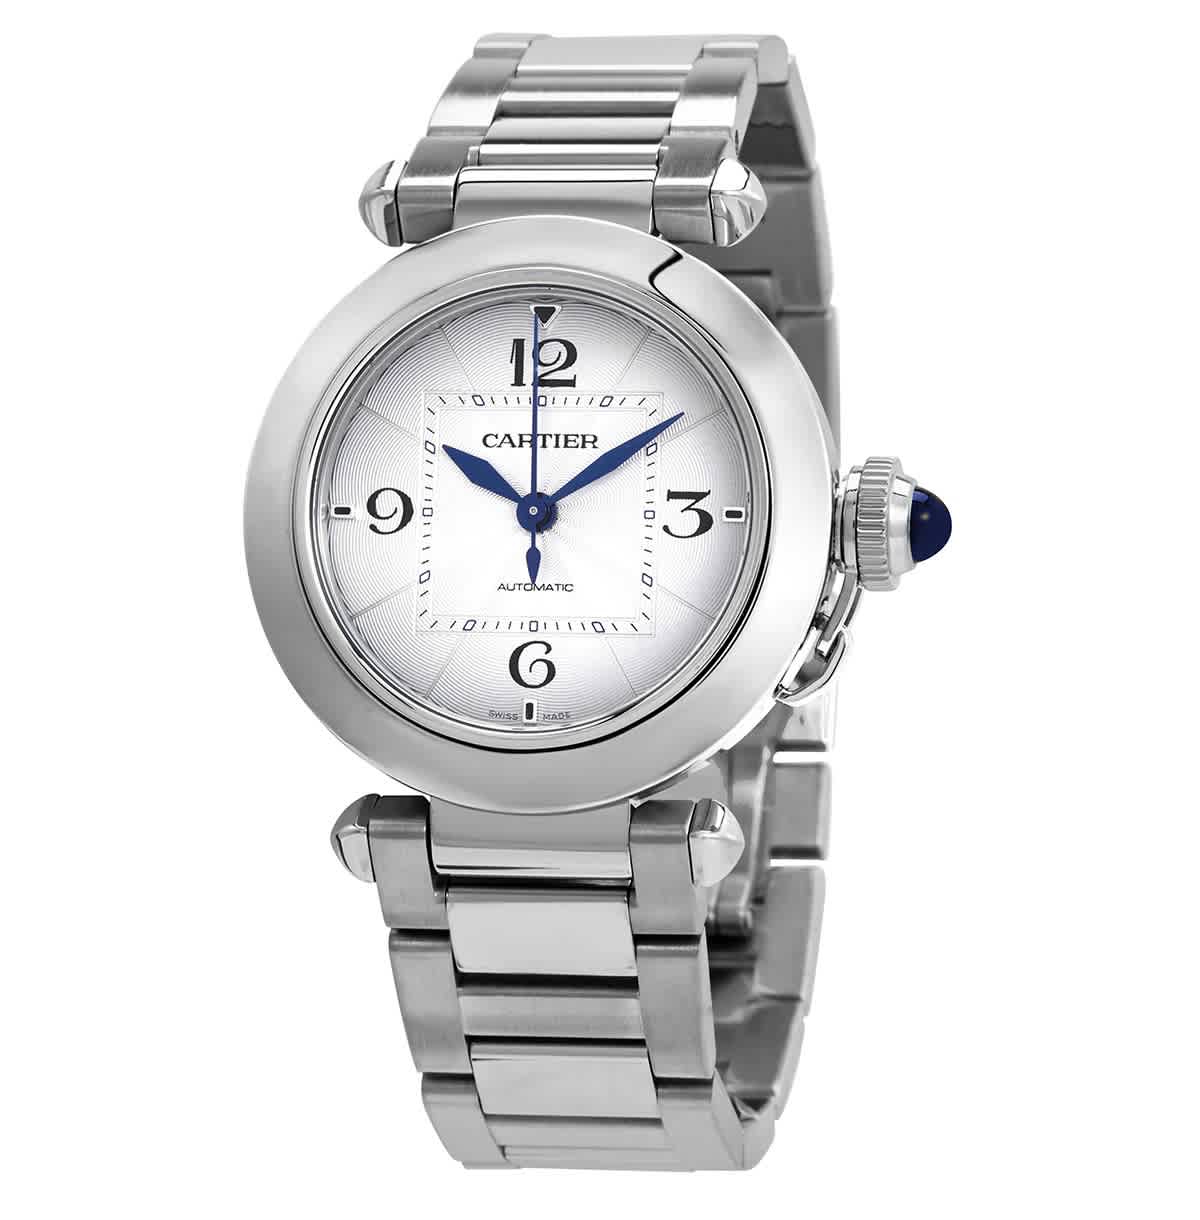 CARTIER CARTIER PASHA AUTOMATIC SILVER DIAL LADIES WATCH WSPA0013